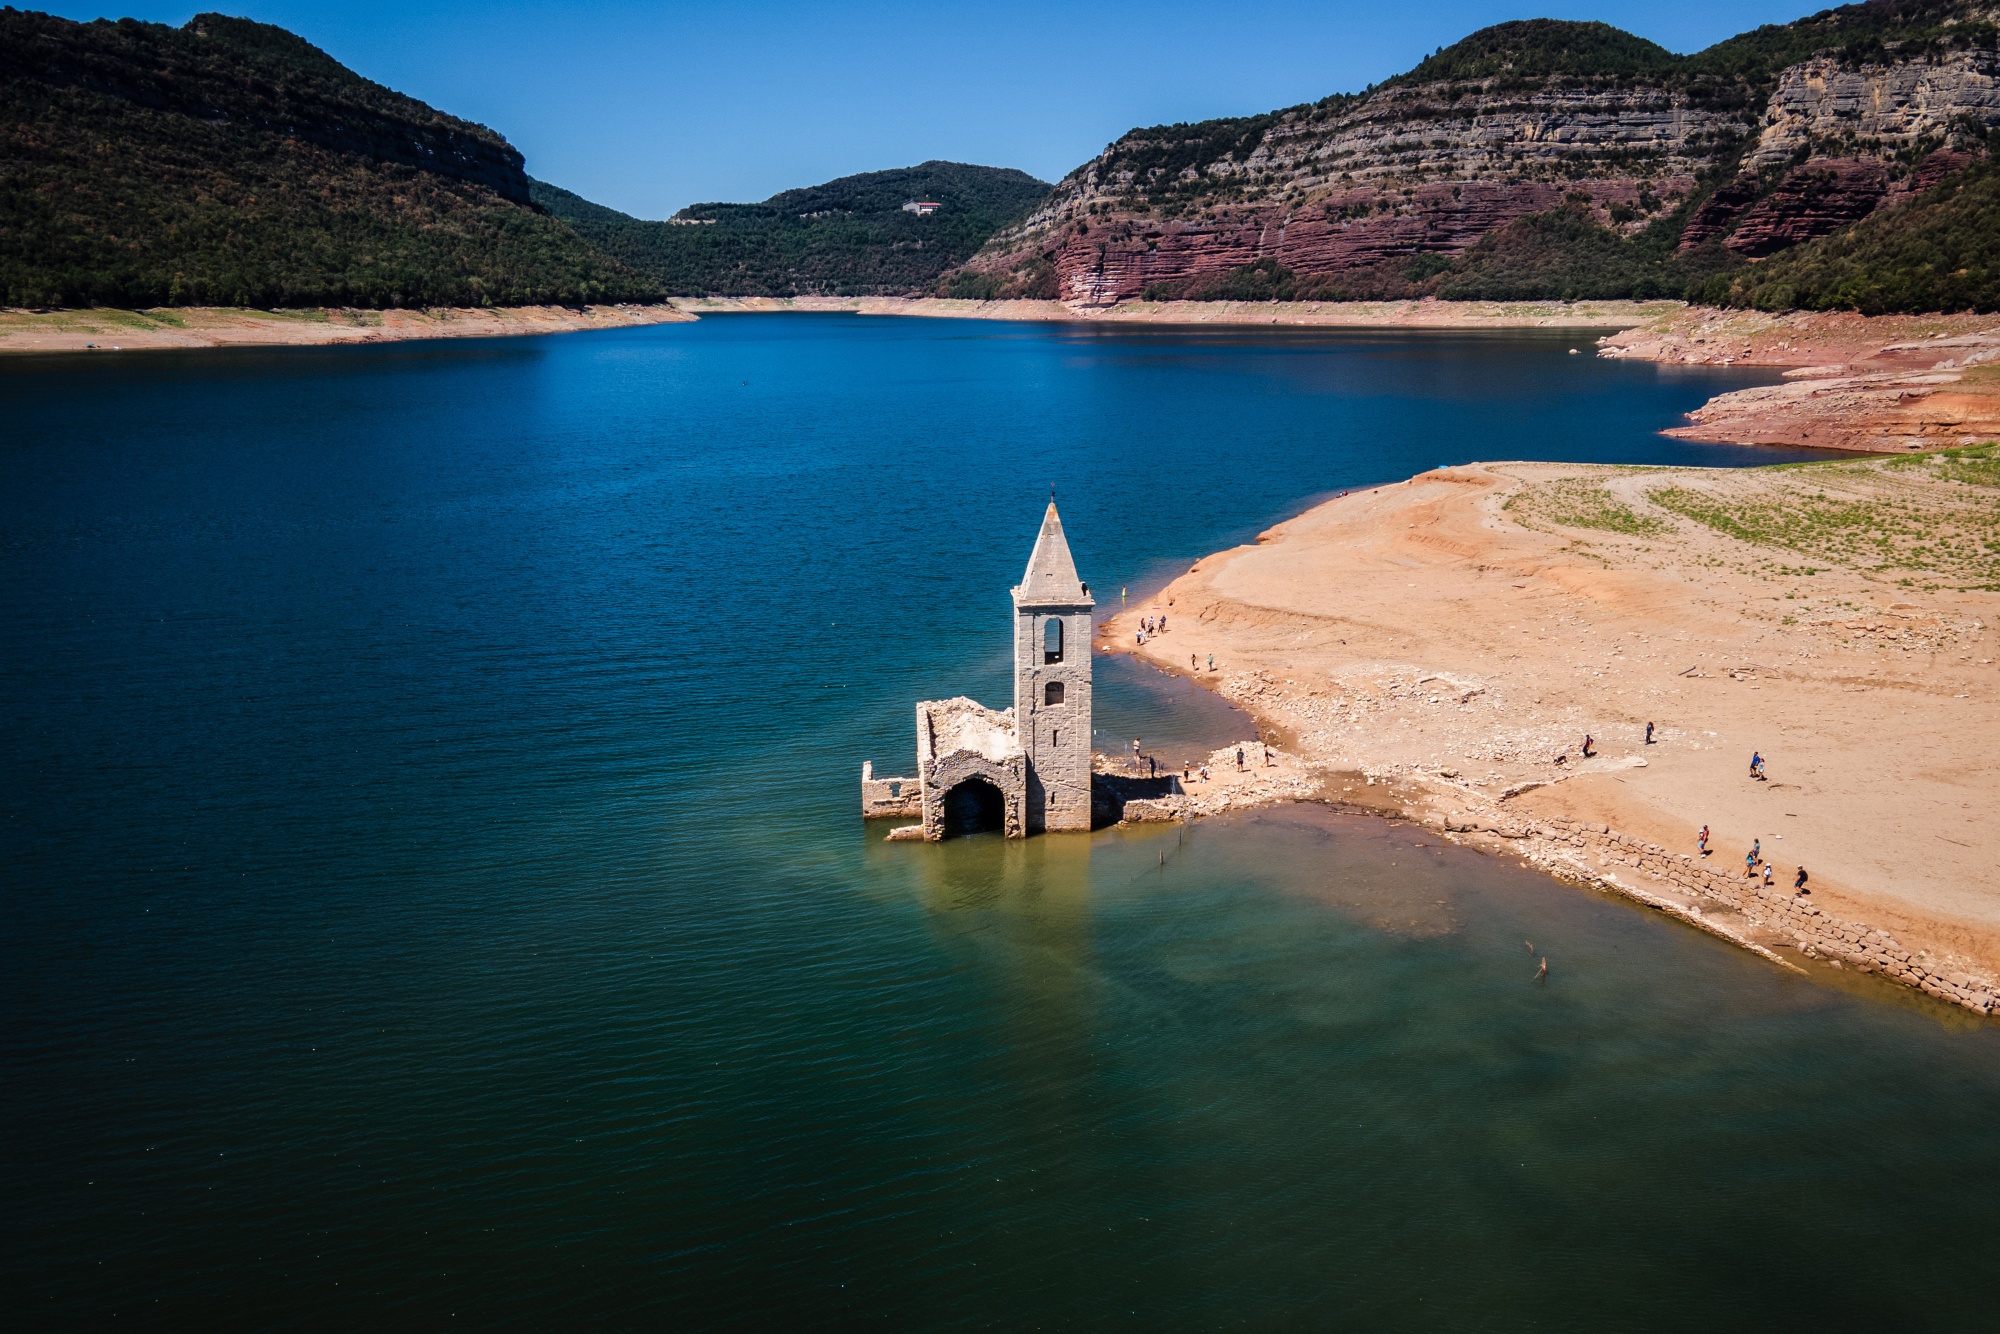 Ruins of the Sant Roma church, exposed by low water levels in the Sau reservoir following drought, in Vilanova de Sau, Spain, on Aug. 20, 2022.